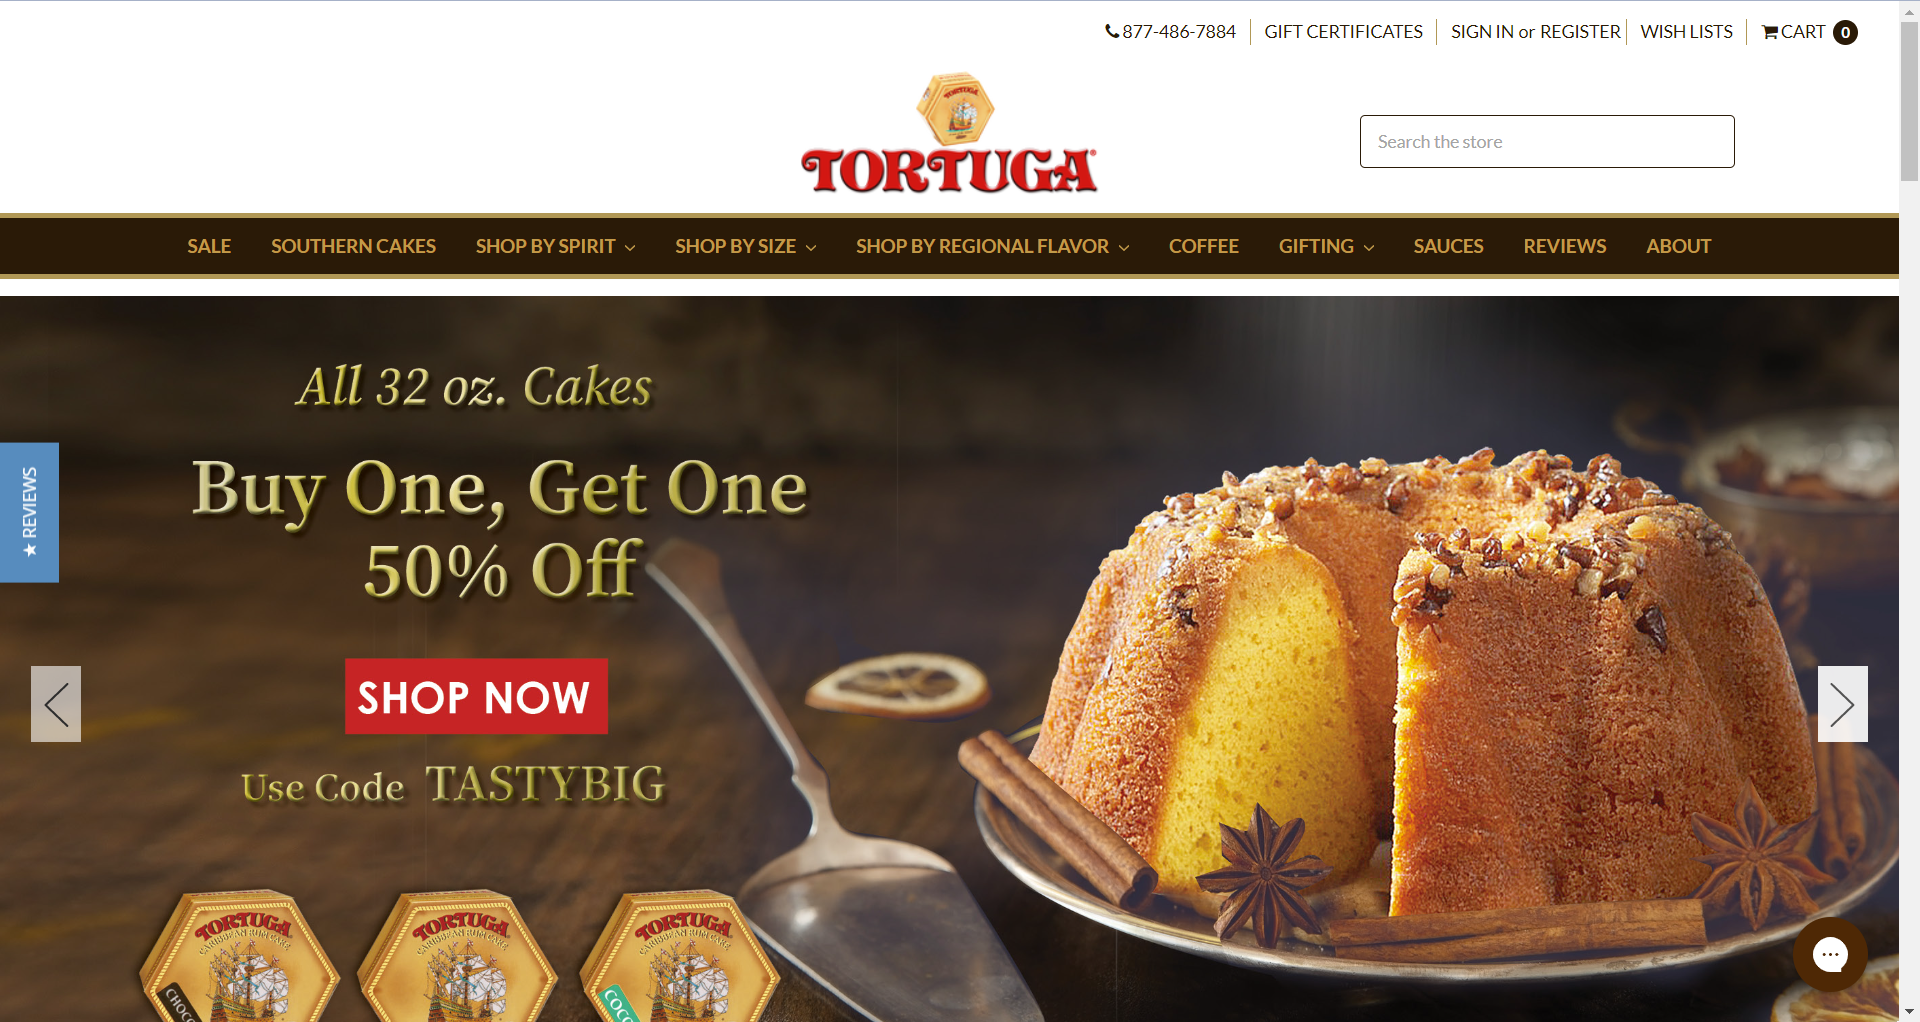 tortuga rum cakes home page